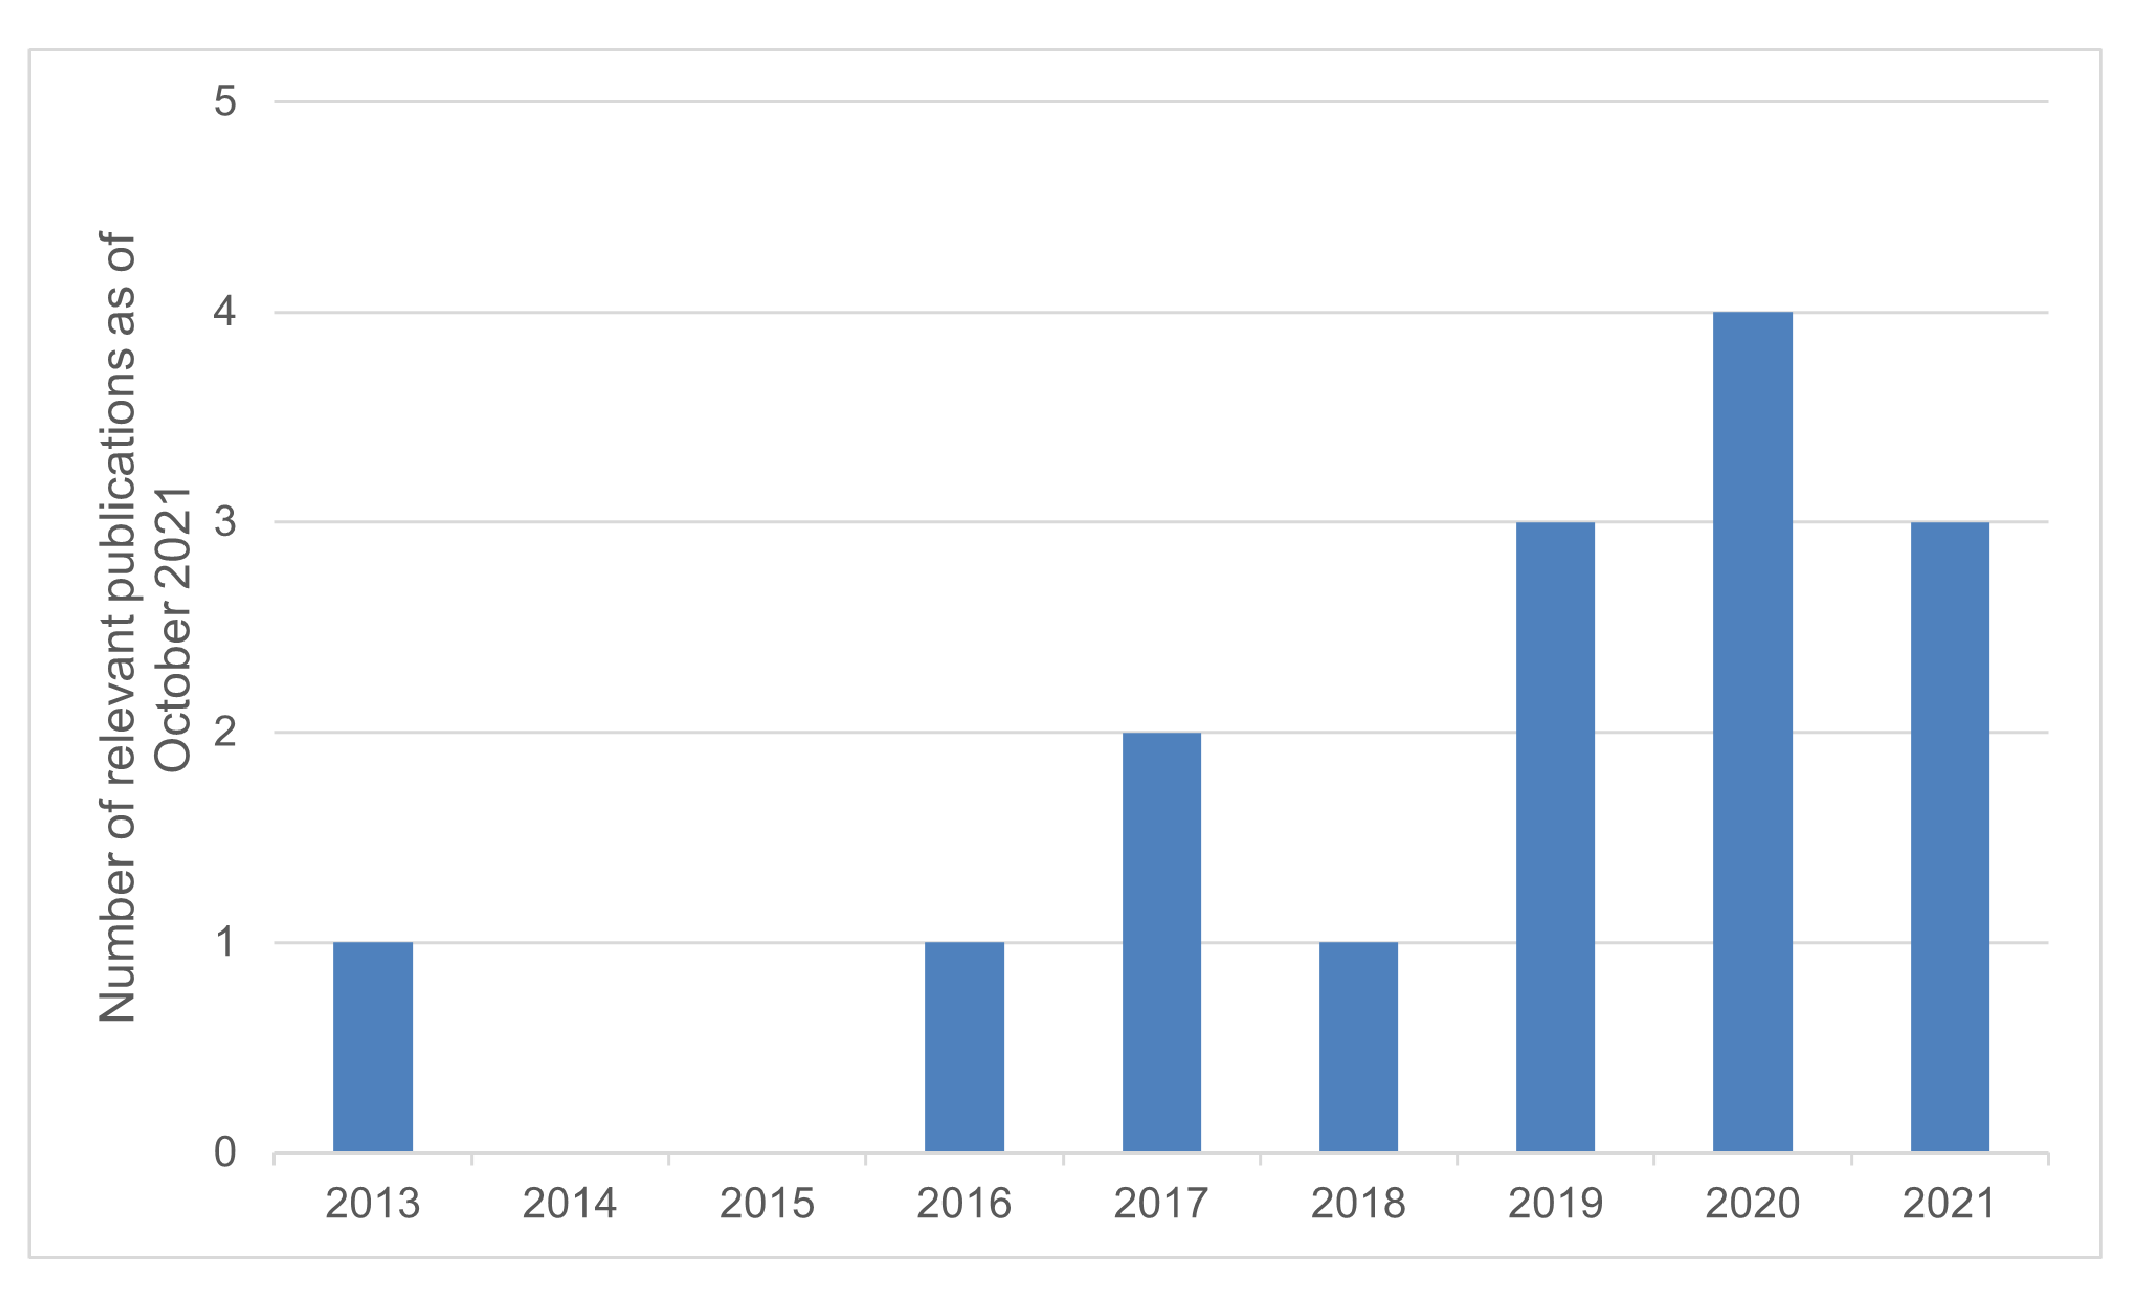 This illustration depicts the number of included studies by publication year identified during the baseline review: 1 in 2013, 0 in 2014 and 2015, 1 in 2016, 2 in 2017, 1 in 2018, 3 in 2019, 4 in 2020 and 3 as of October 2021.